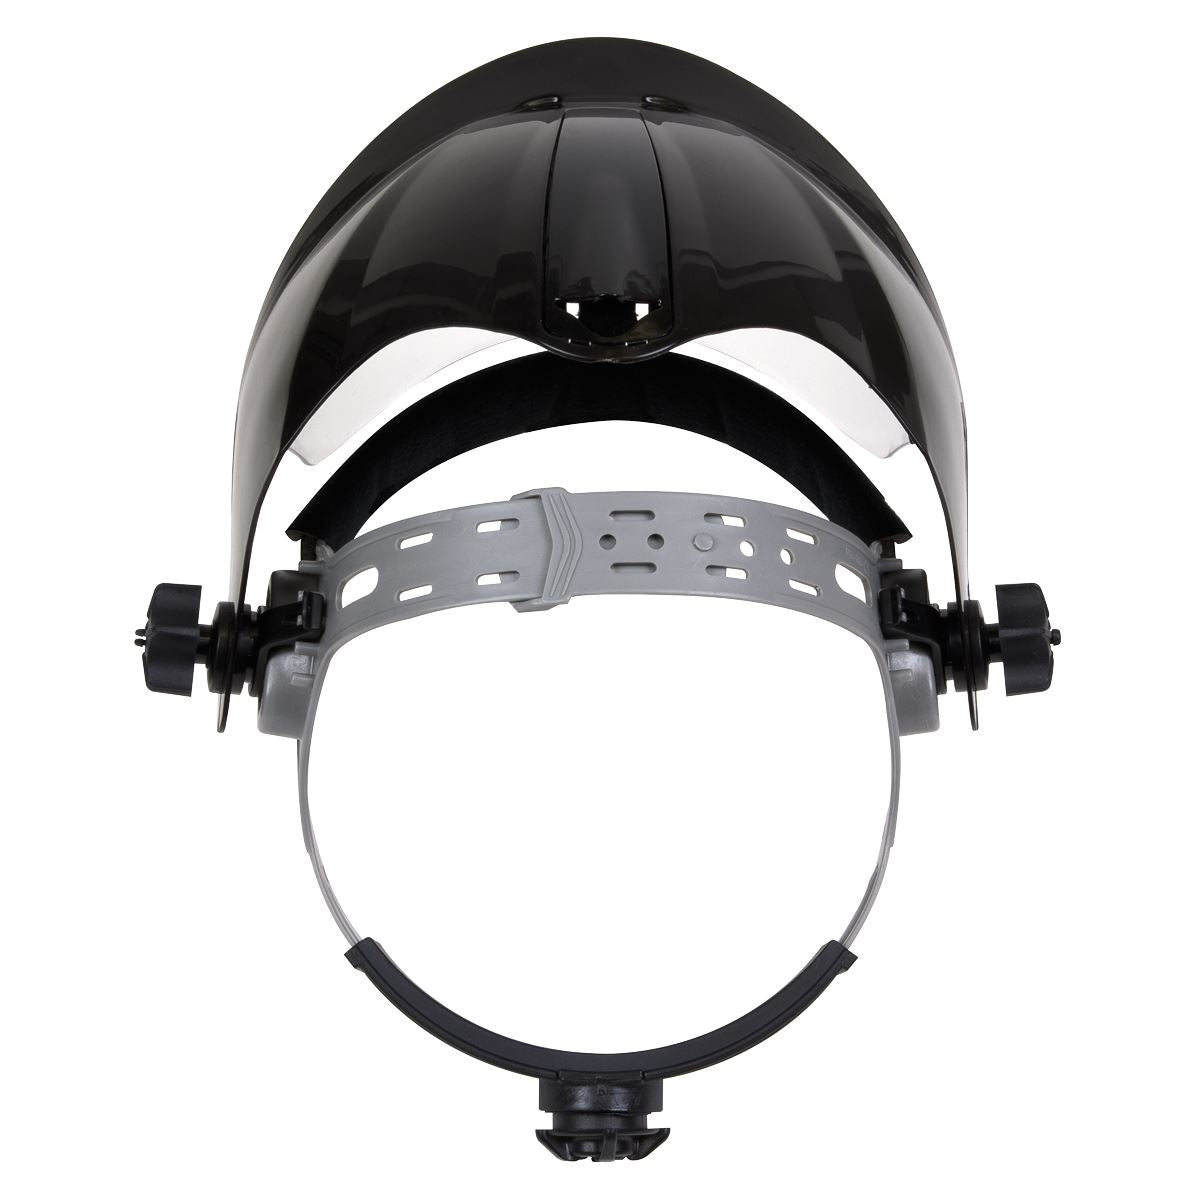 Worksafe by Sealey Deluxe Brow Guard with Aspherical Polycarbonate Full Face Shield